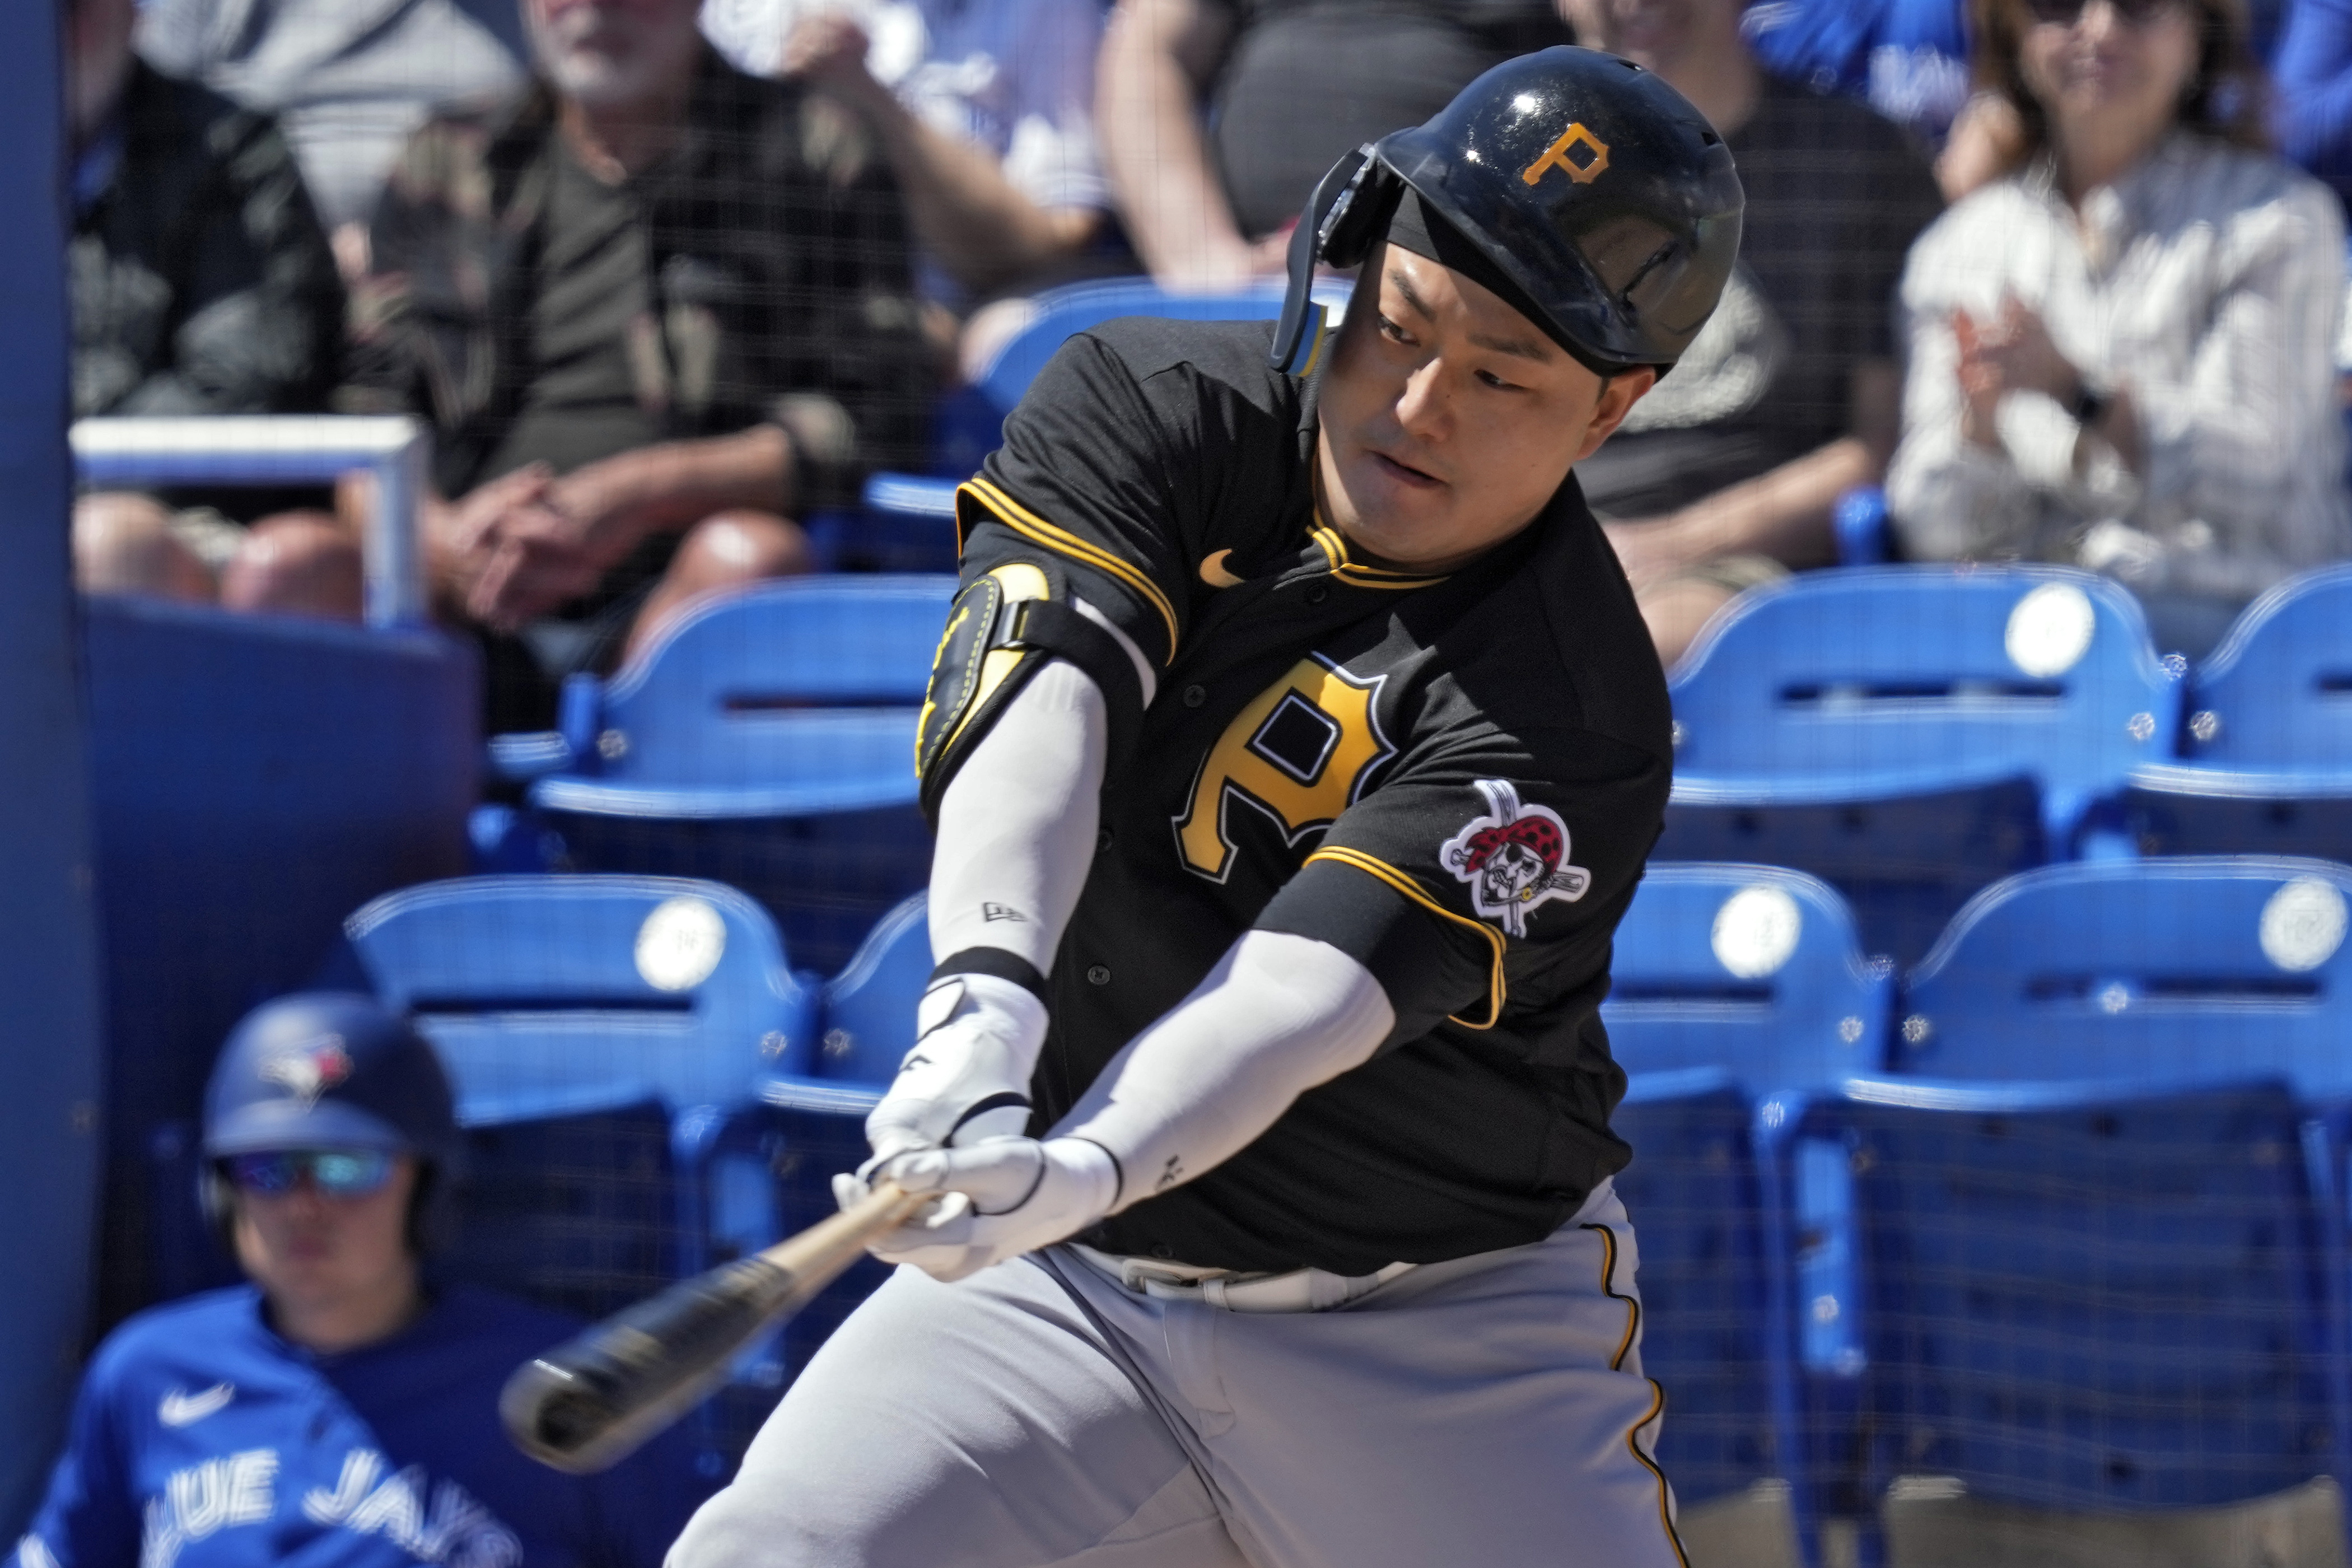 The Pirates make their first offseason move: What's next after Ji-Man Choi  trade? - The Athletic